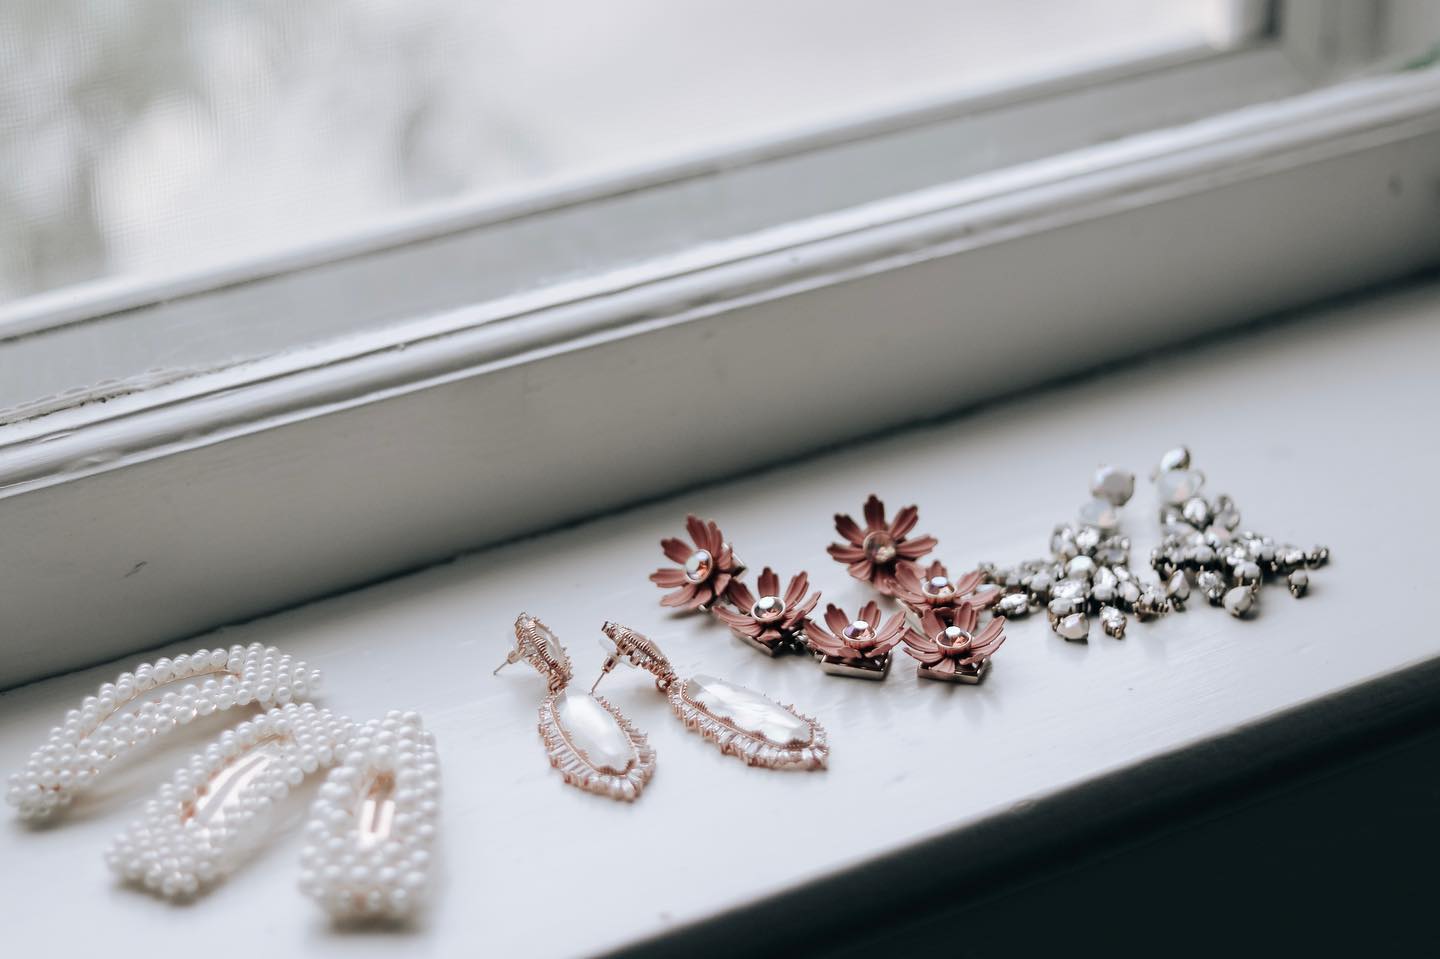 Close-up image of earrings and hair clips